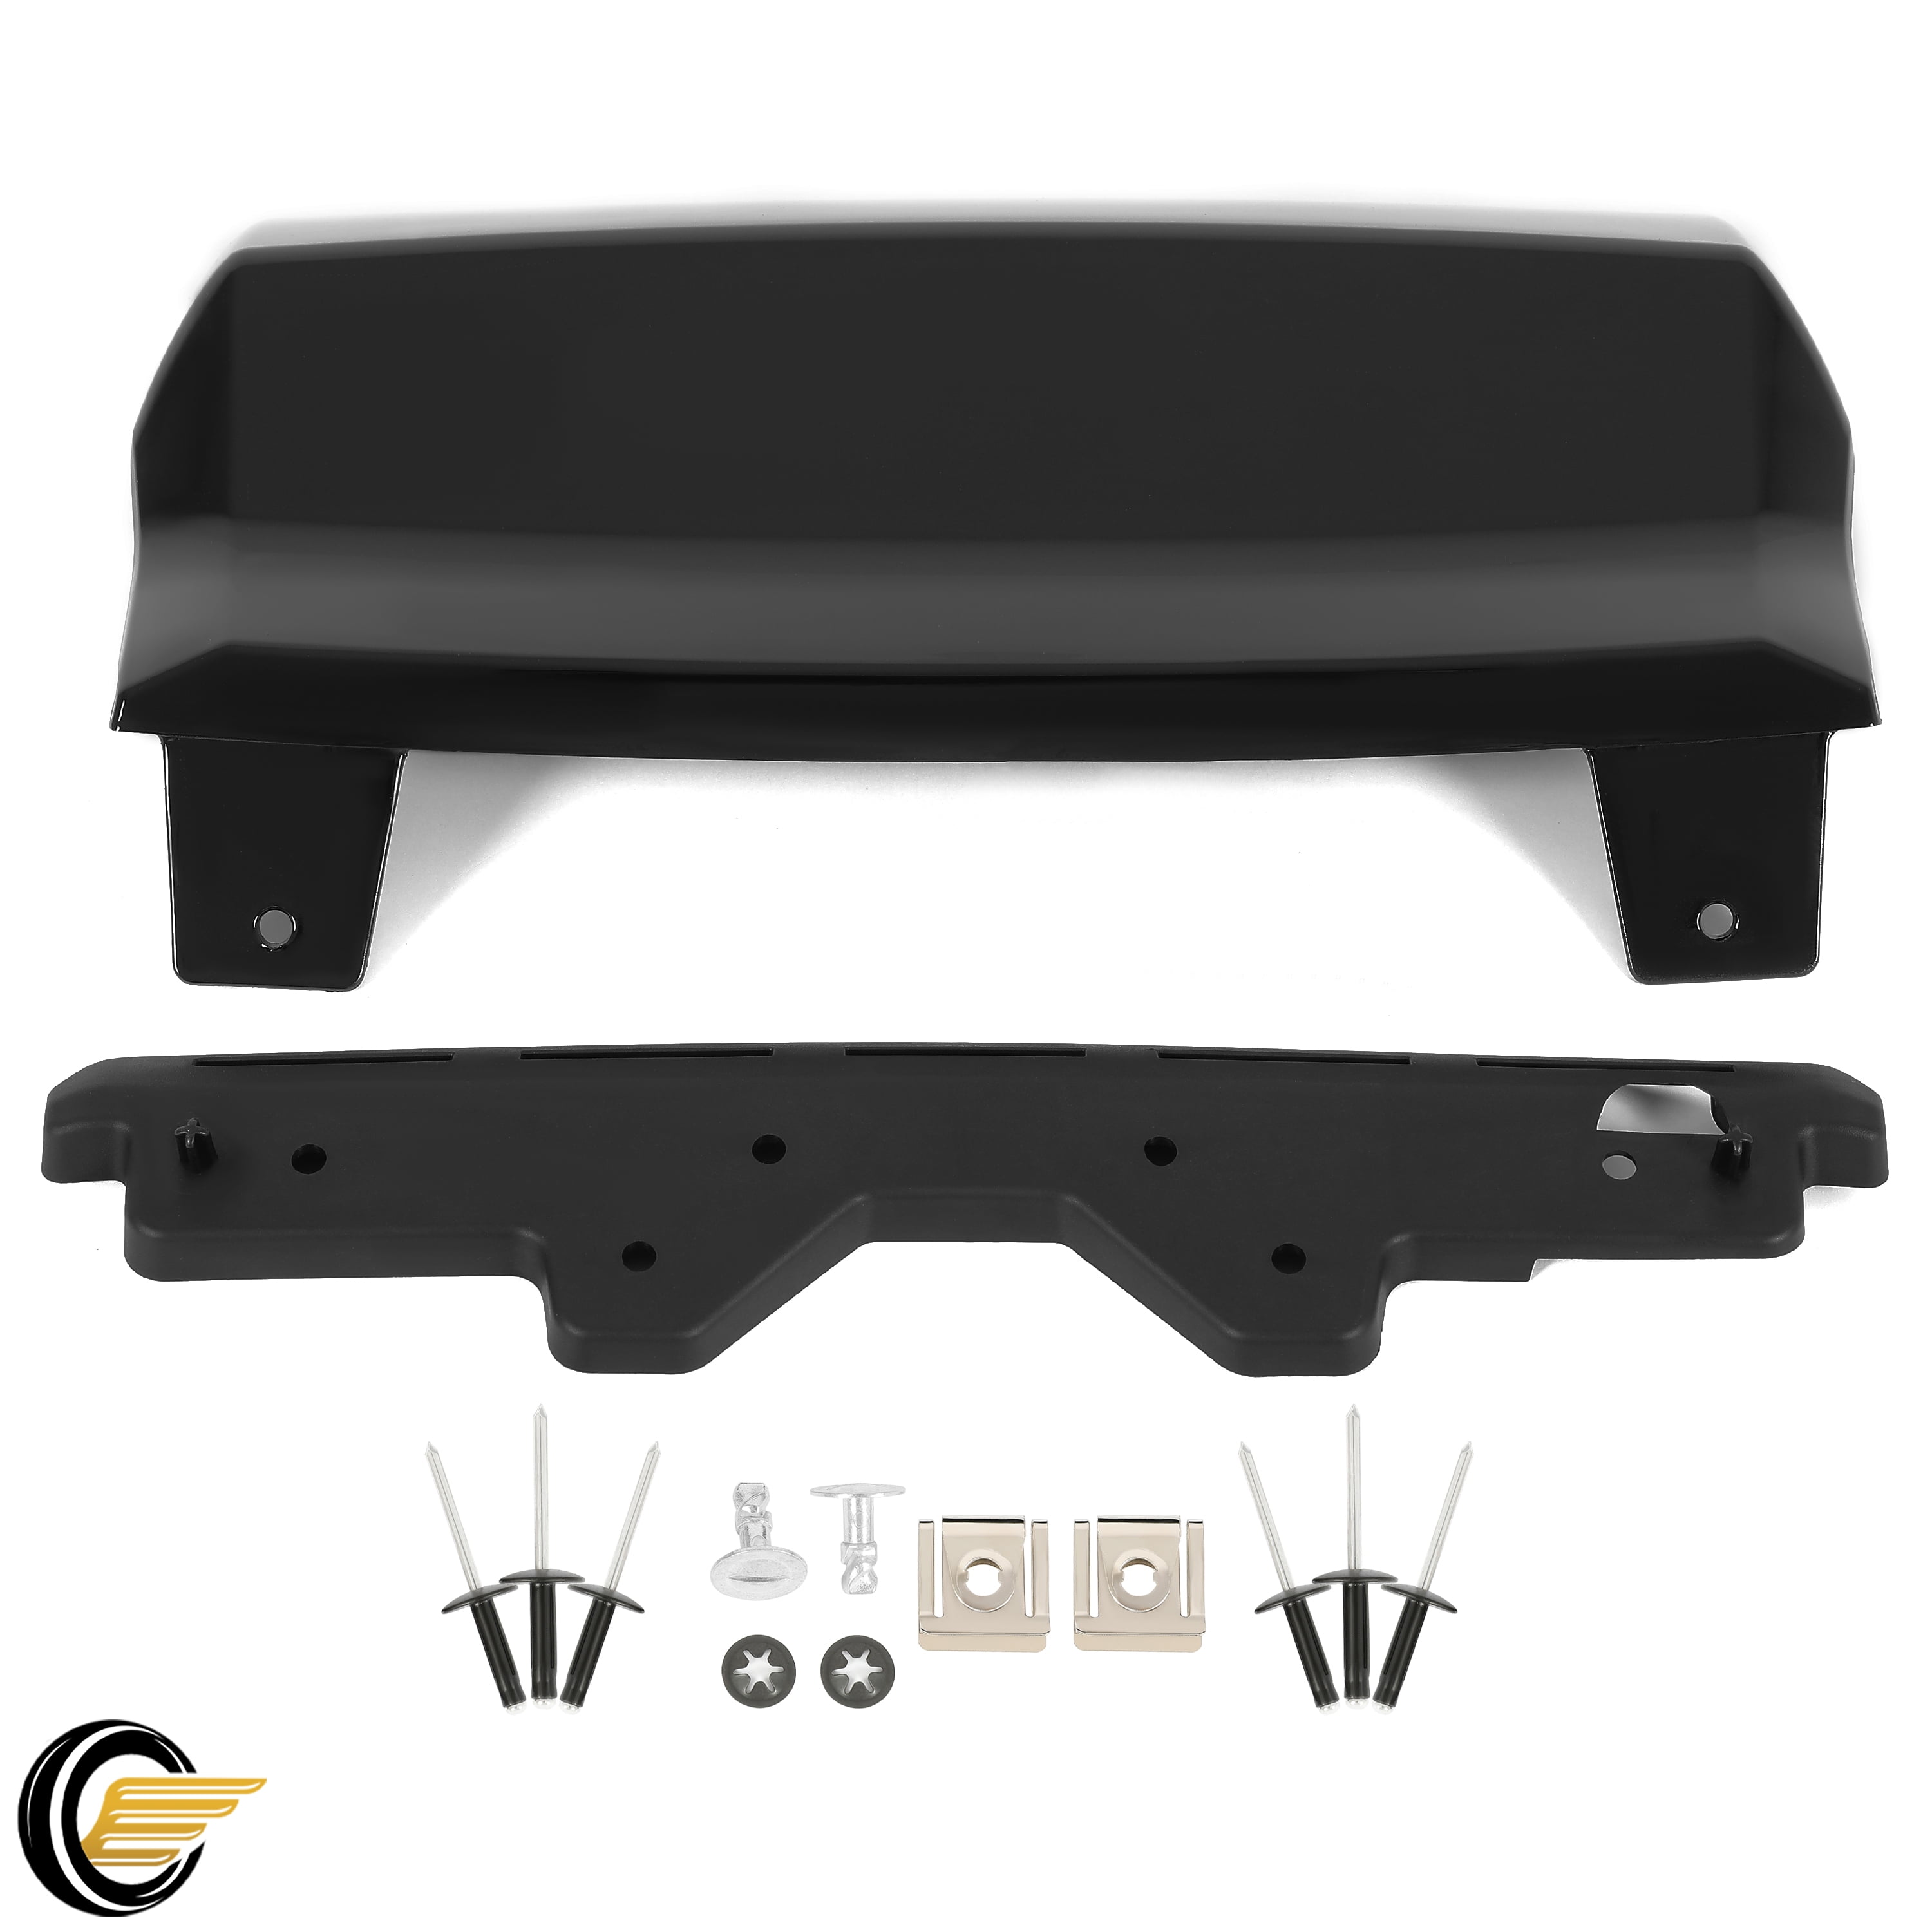 KOJEM Hitch Cover for 2015-2020 Tahoe Suburban 2016 2017 2018 2019 for  23139222 W/ Trailer Hitch Reciever Cover Bracket